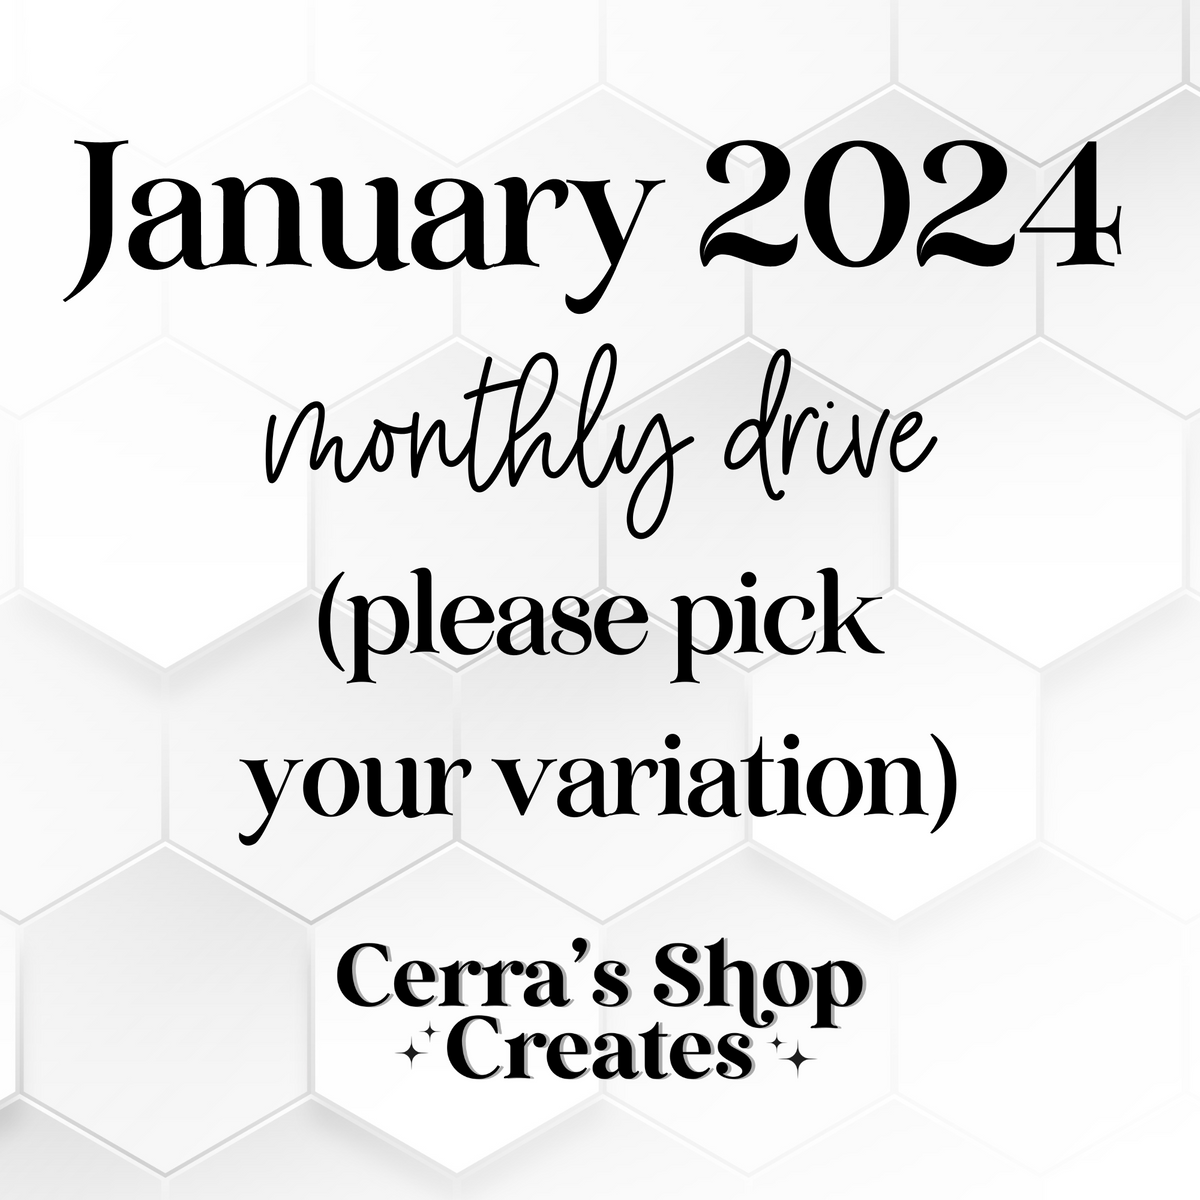 January 2024 Drives (please pick your variation)